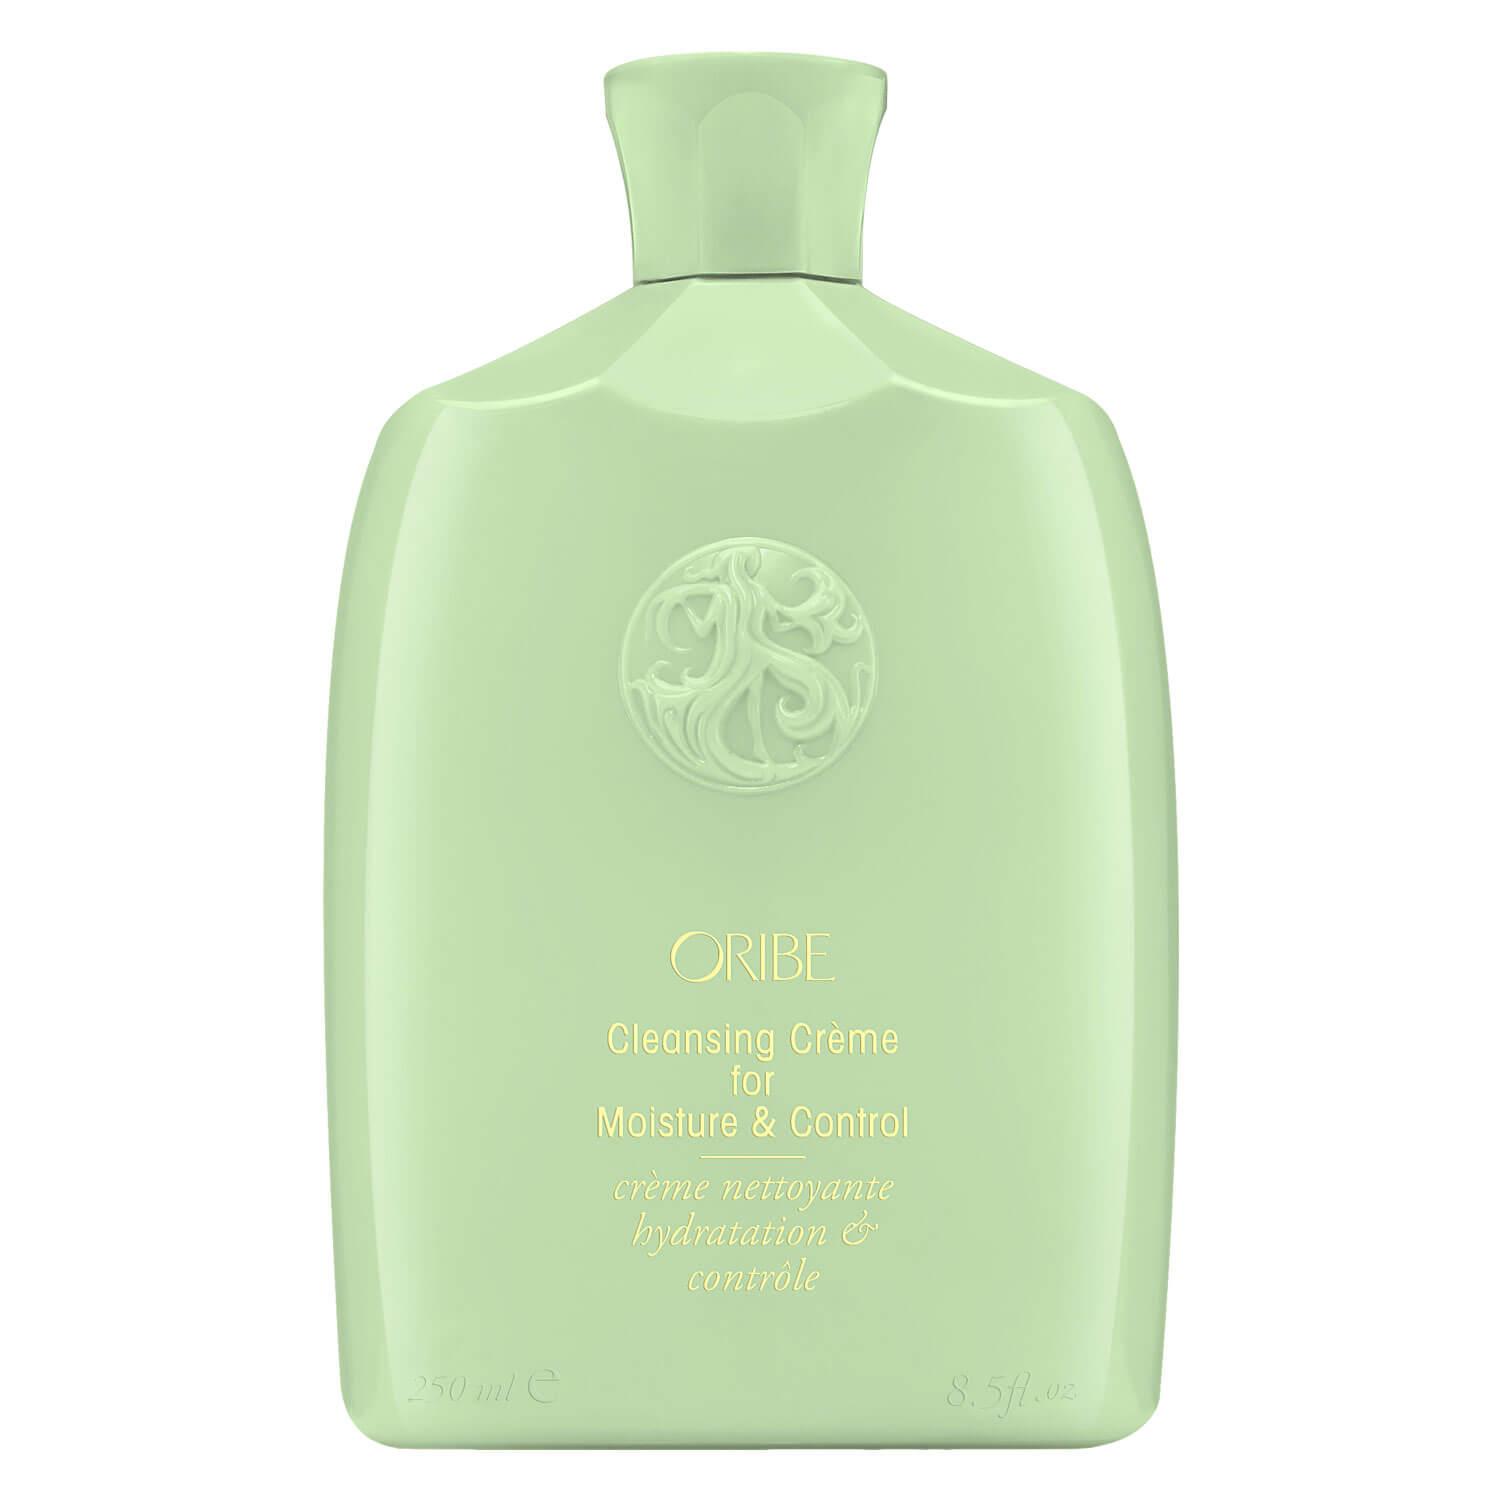 Oribe Care - Cleansing Crème for Moisture & Control